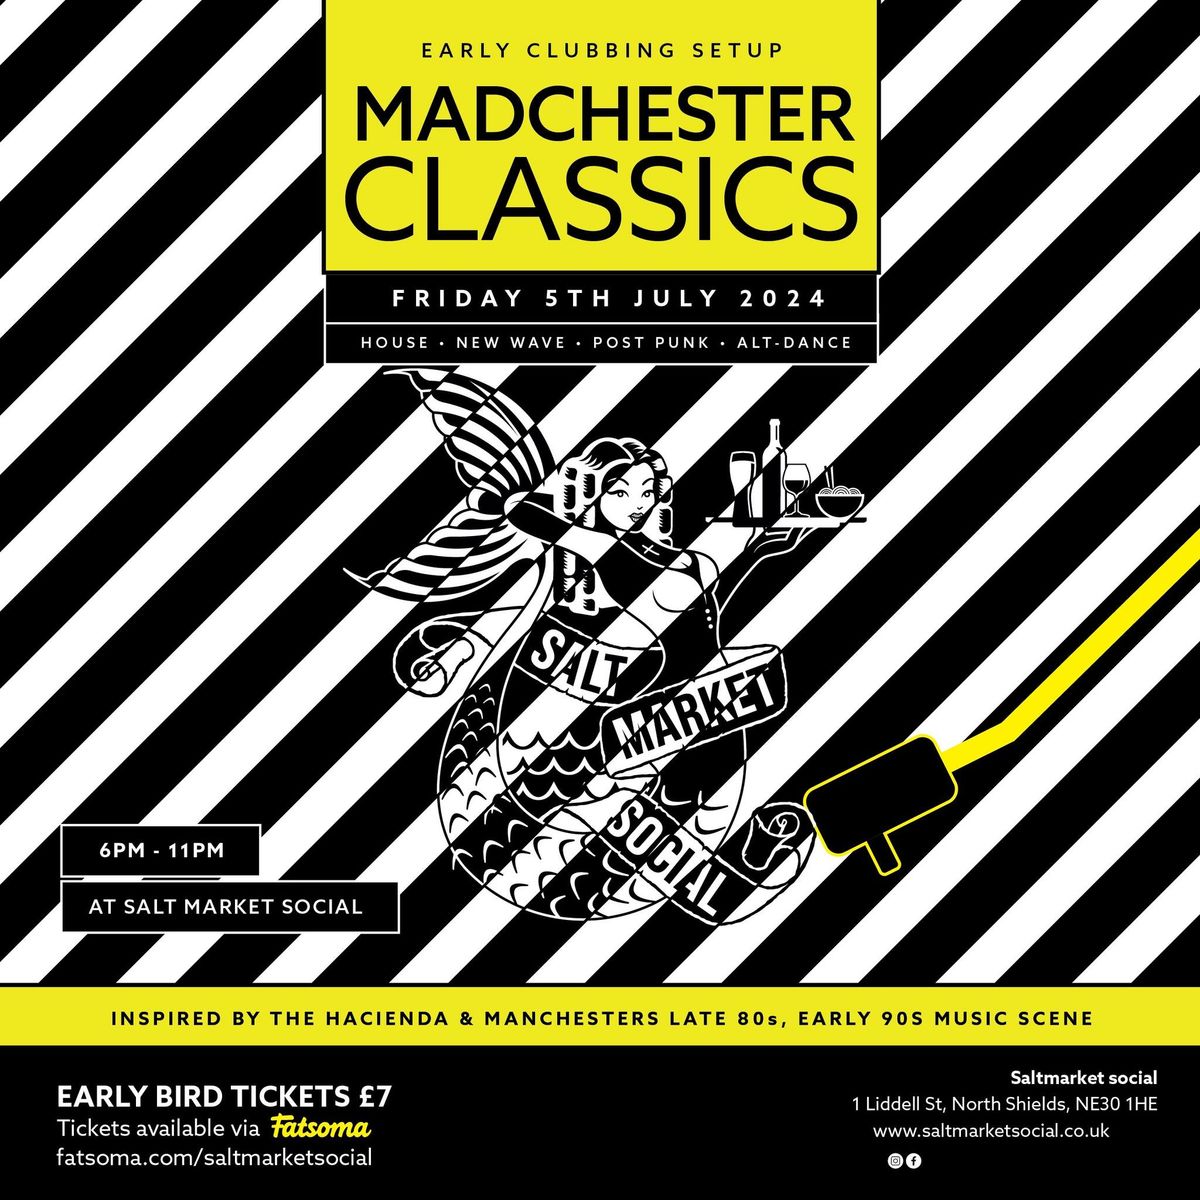 MADCHESTER CLASSICS | EARLY CLUBBING SETUP